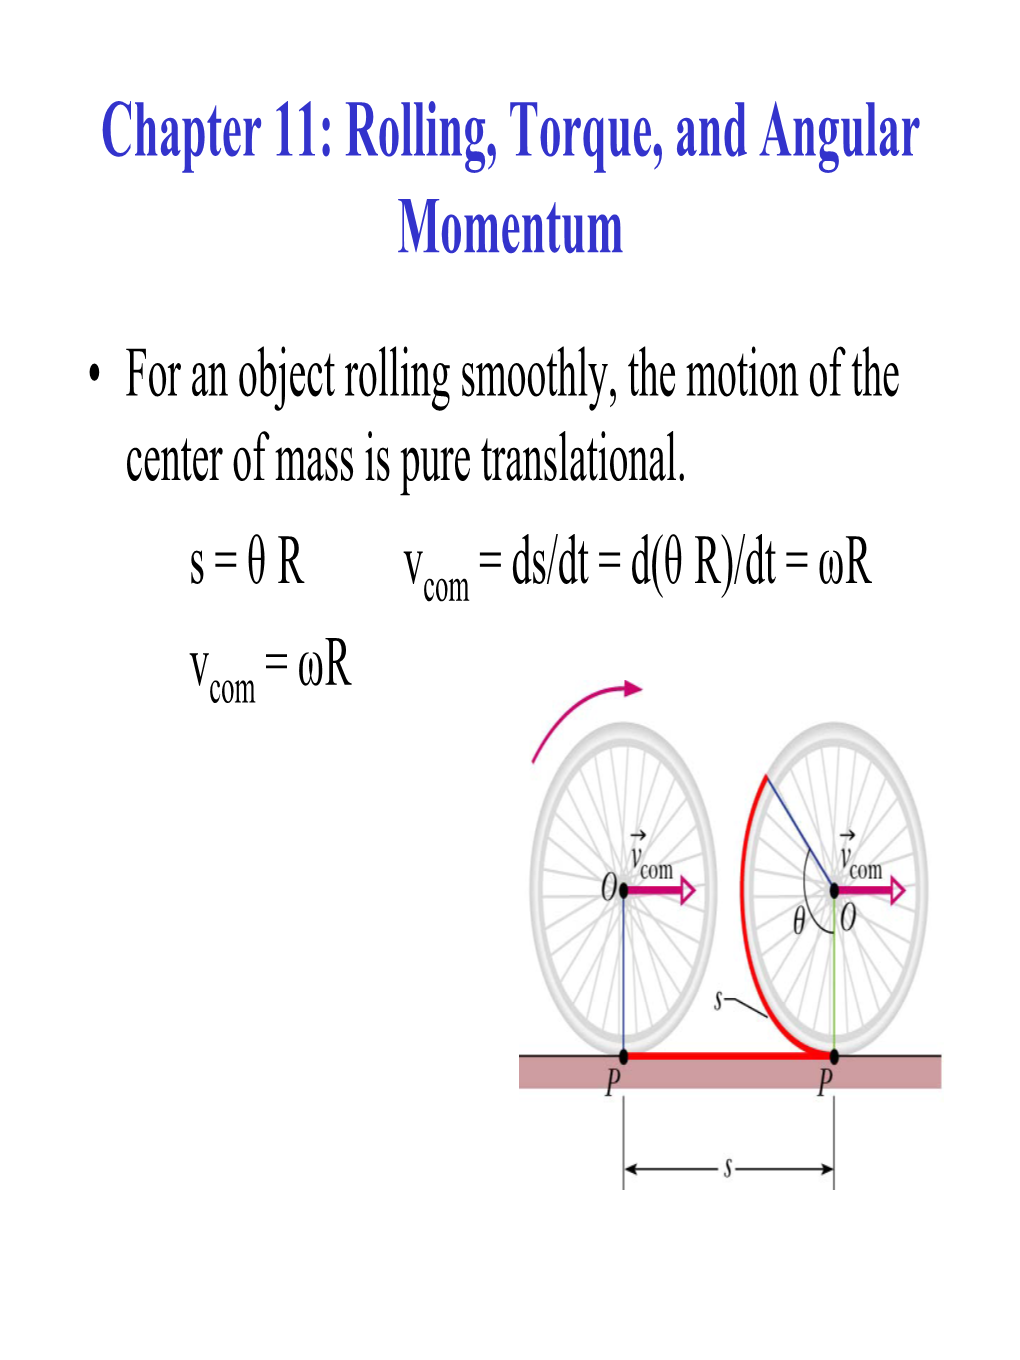 Chapter 11: Rolling, Torque, and Angular Momentum • for an Object Rolling Smoothly, the Motion of the Center of Mass Is Pure Translational